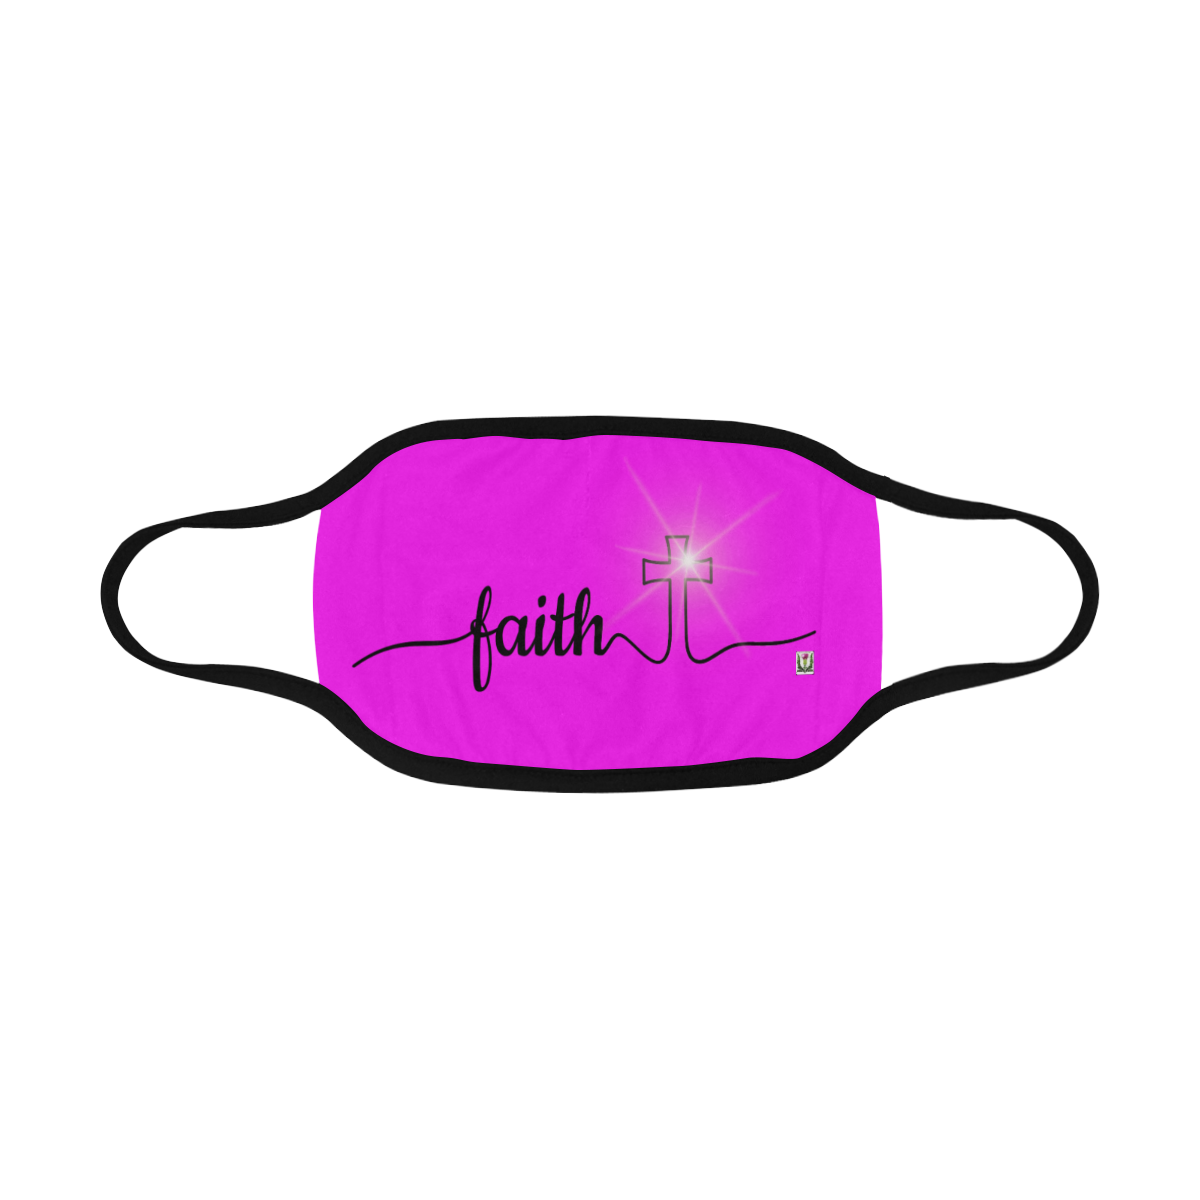 Fairlings Delight's The Word Collection- Faith 53086a11 Mouth Mask